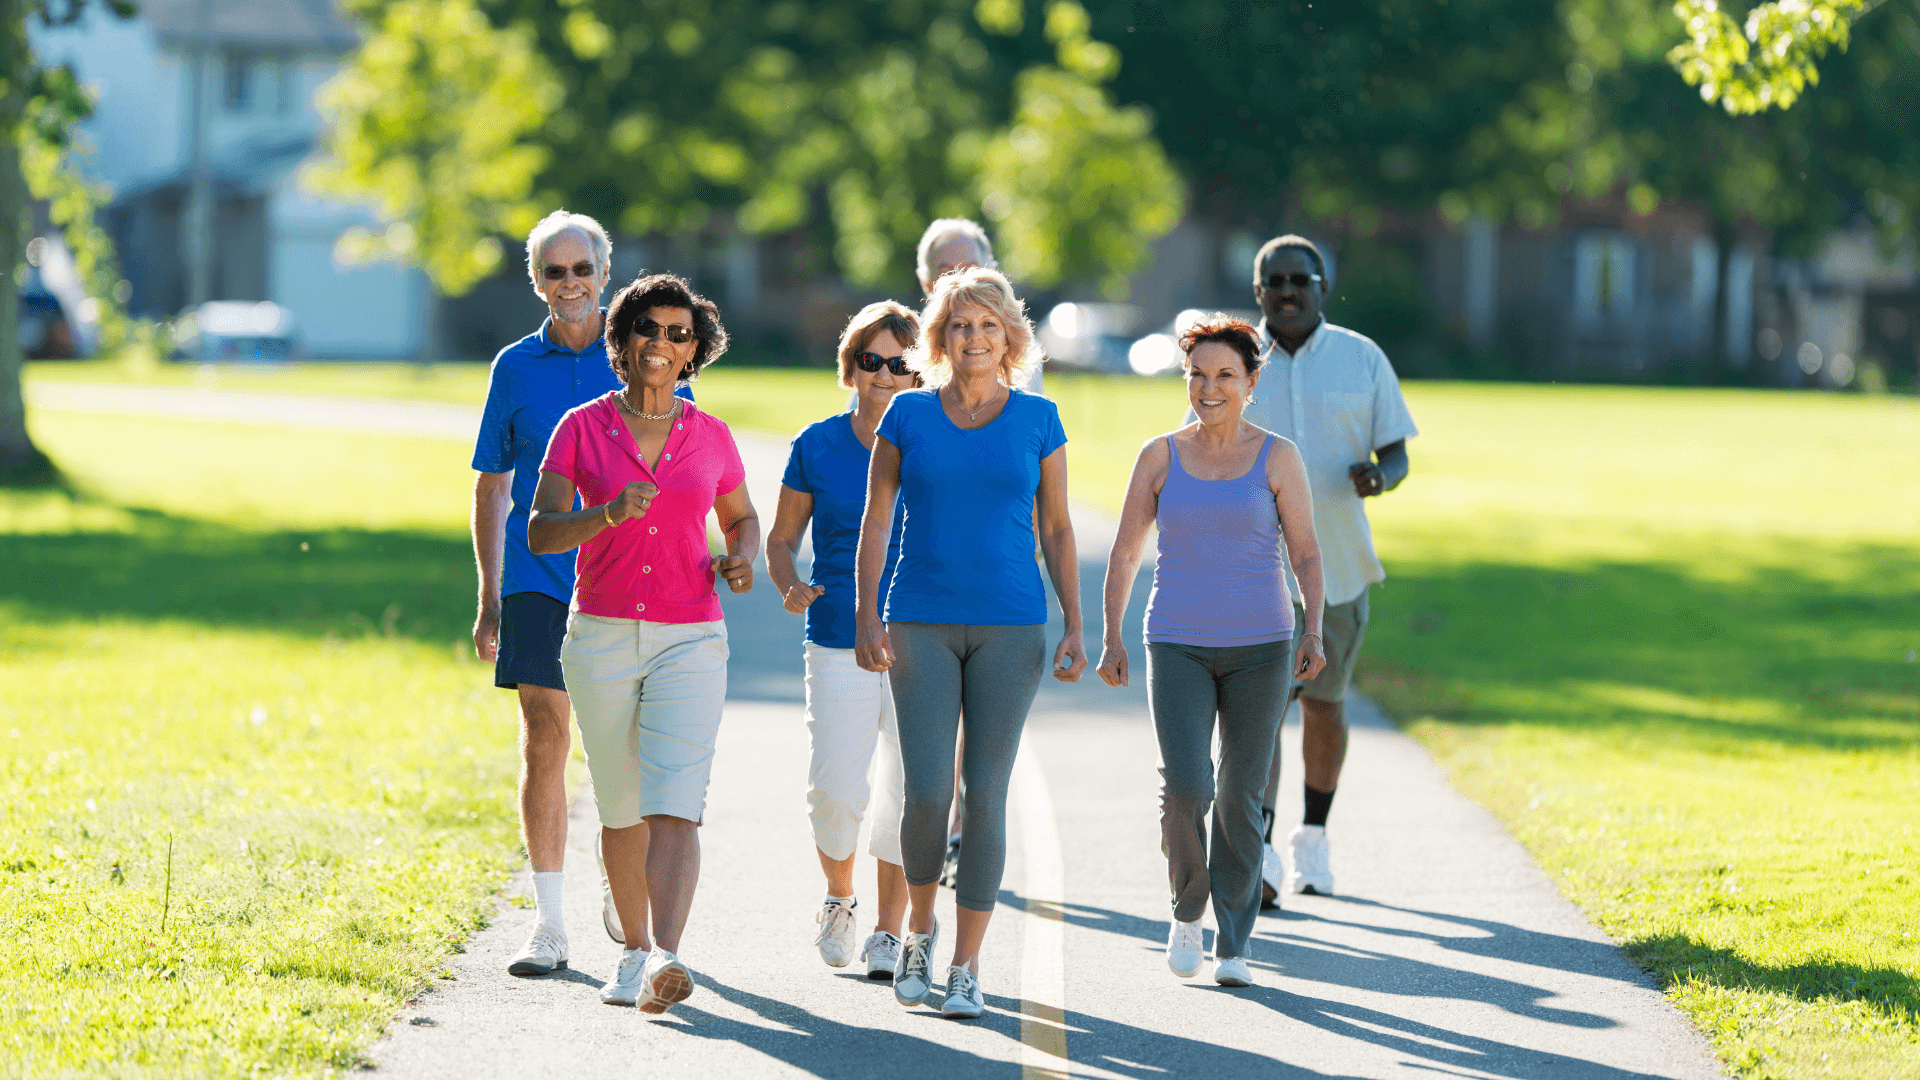 Group of older individuals walking in the park on a sunny day.